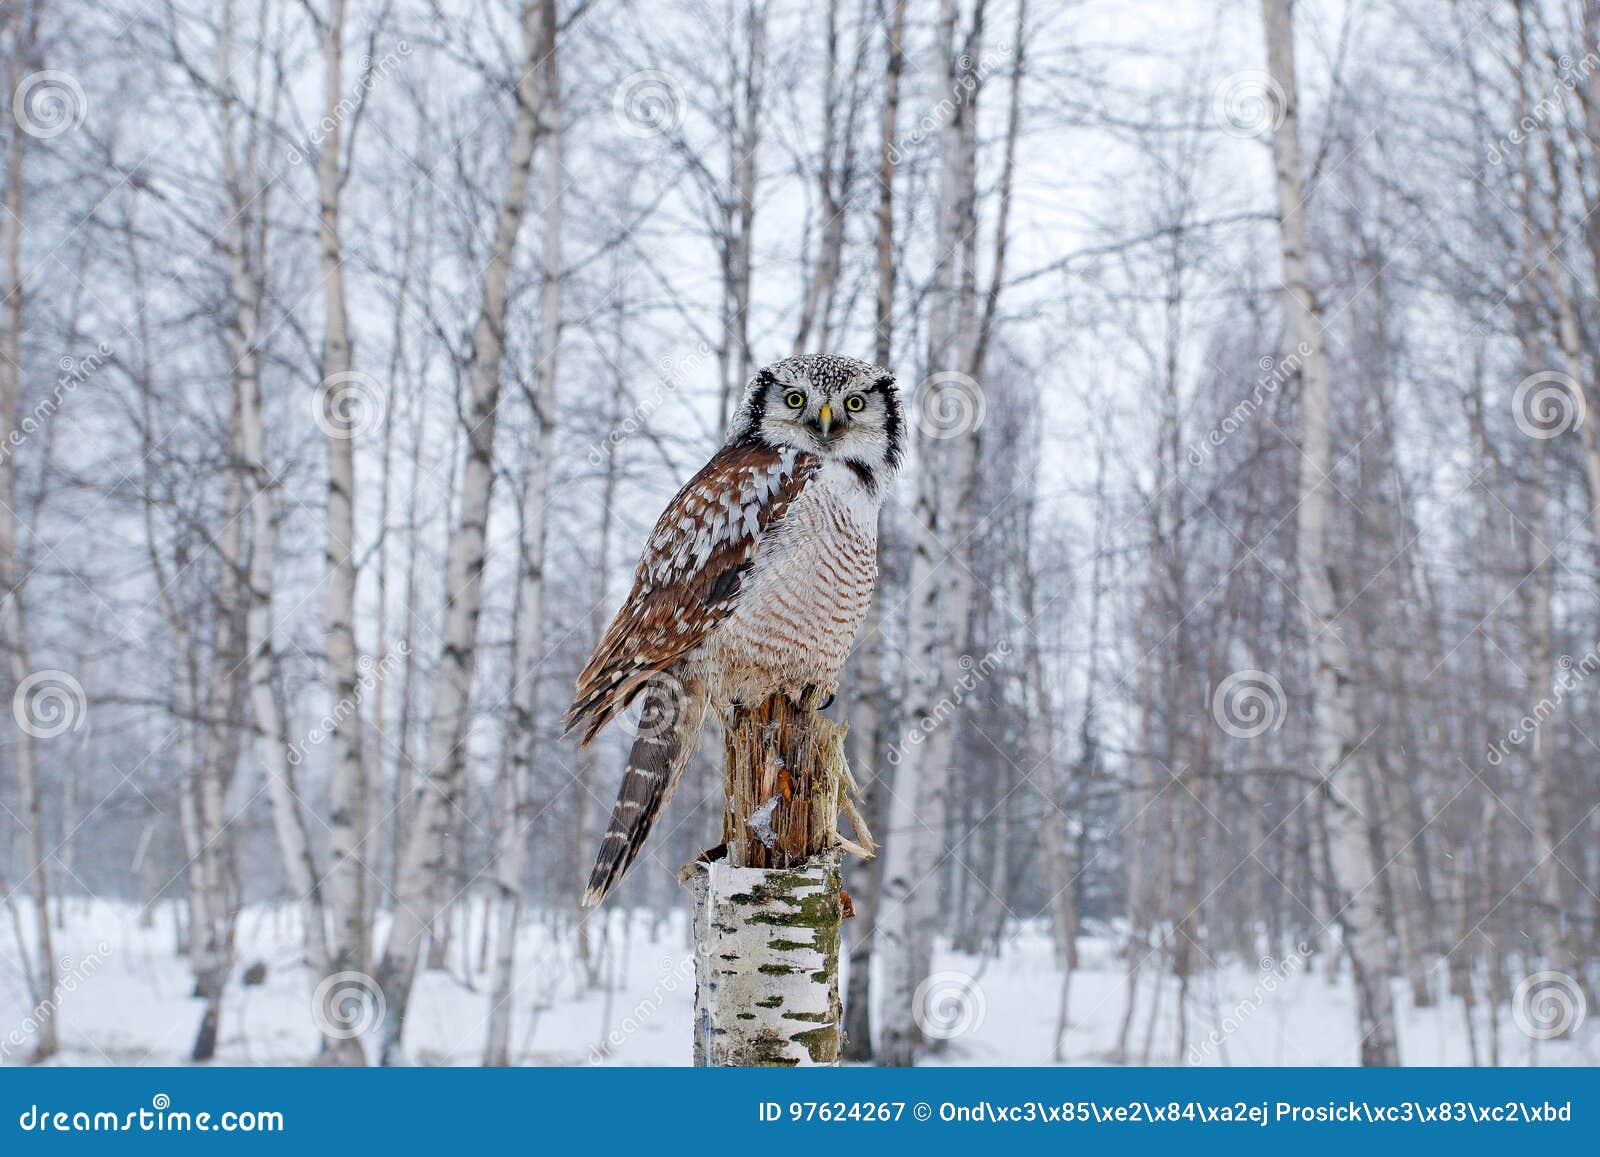 hawk owl in nature forest habitat during cold winter. wildlife scene from nature. birch tree forest with bird. owl, snow finland.